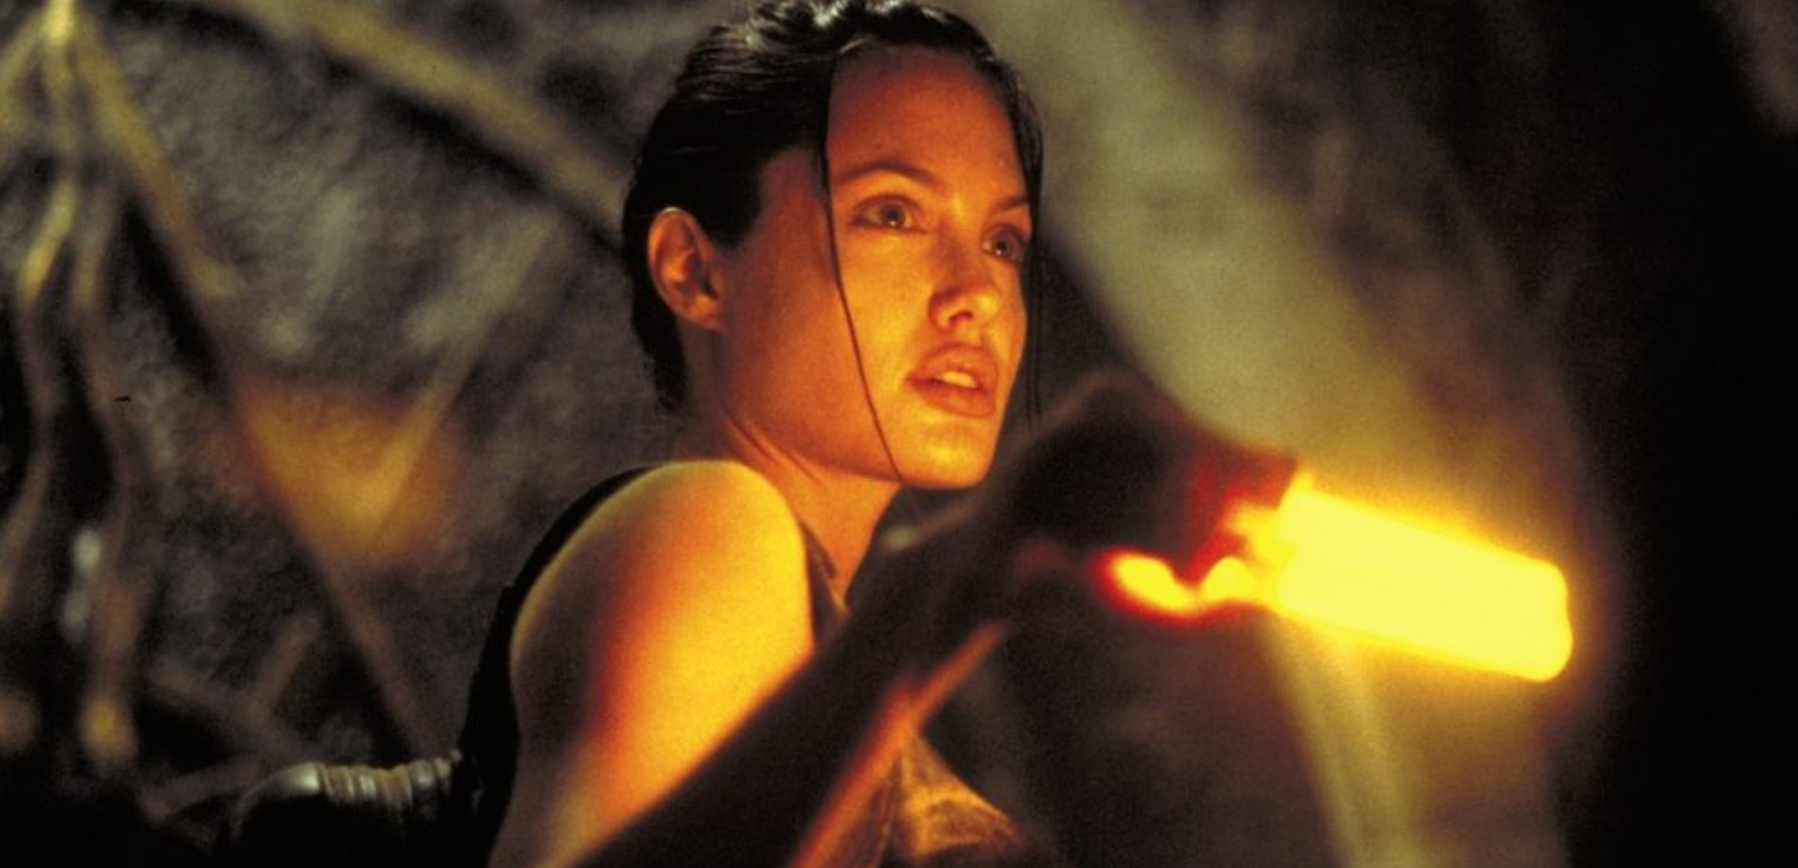 Lara Croft Is The Female Equivalent To Indy